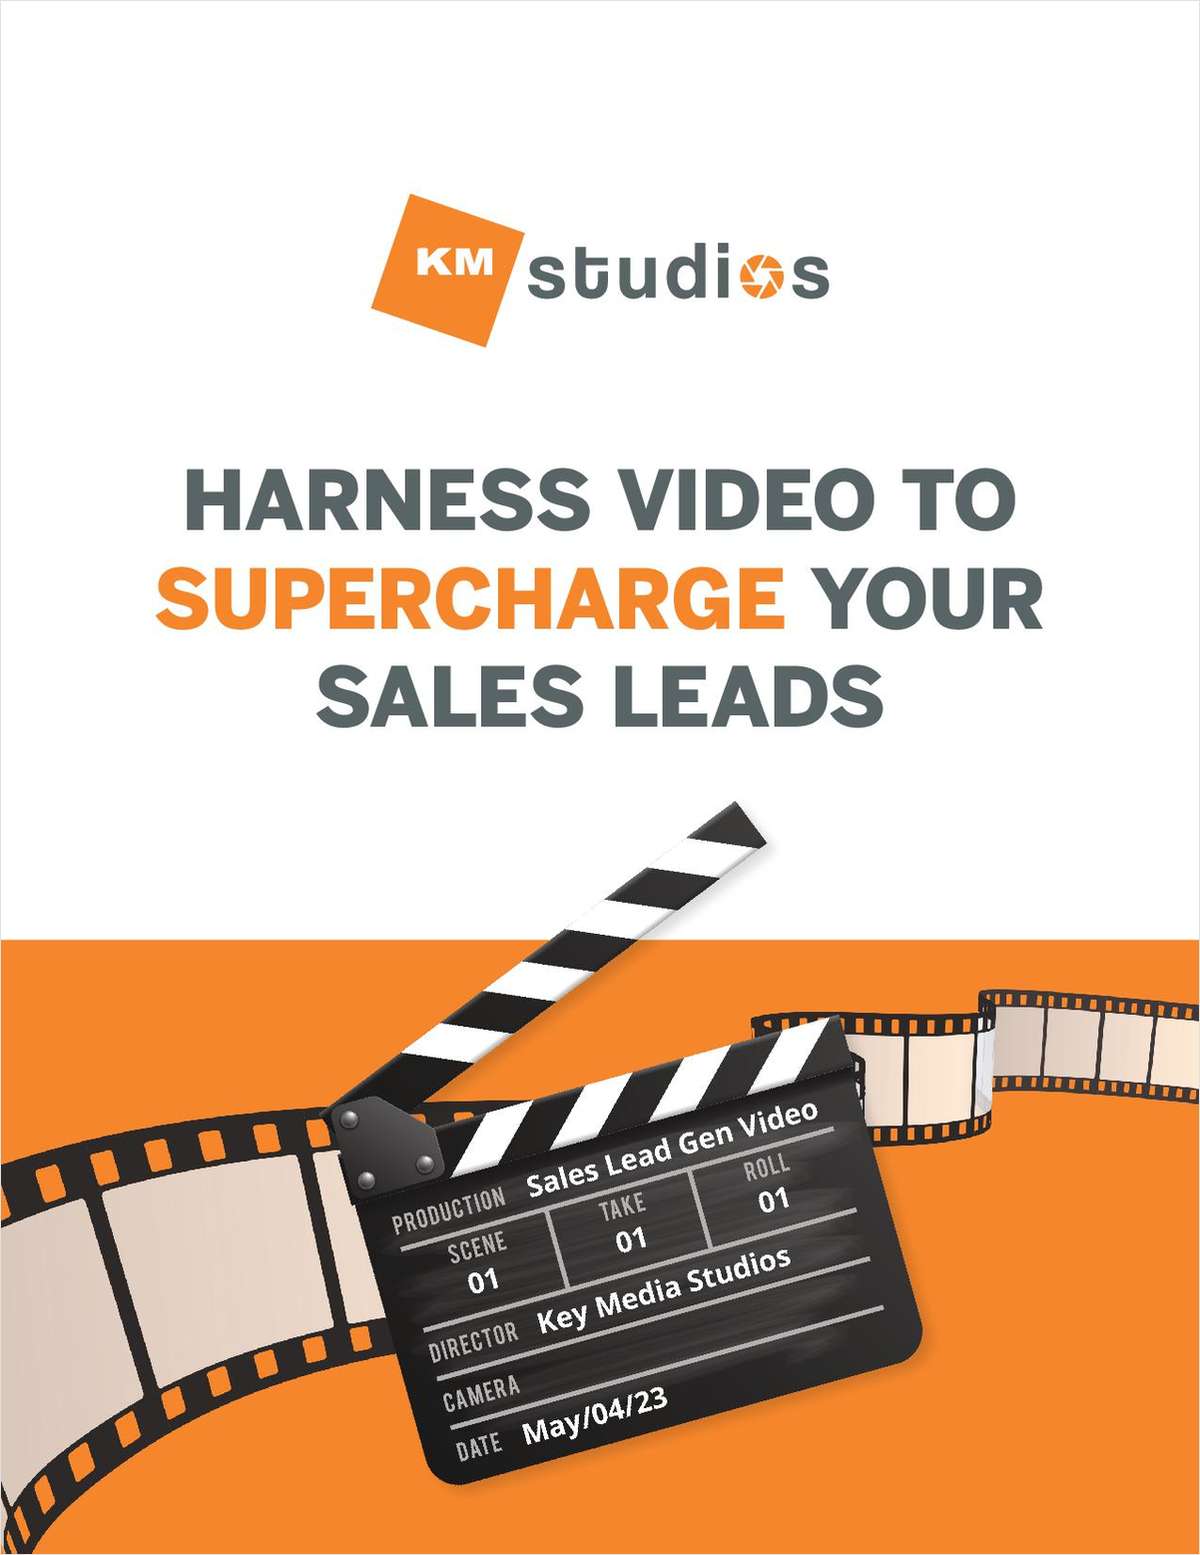 Harness Video to Supercharge Your Sales Leads